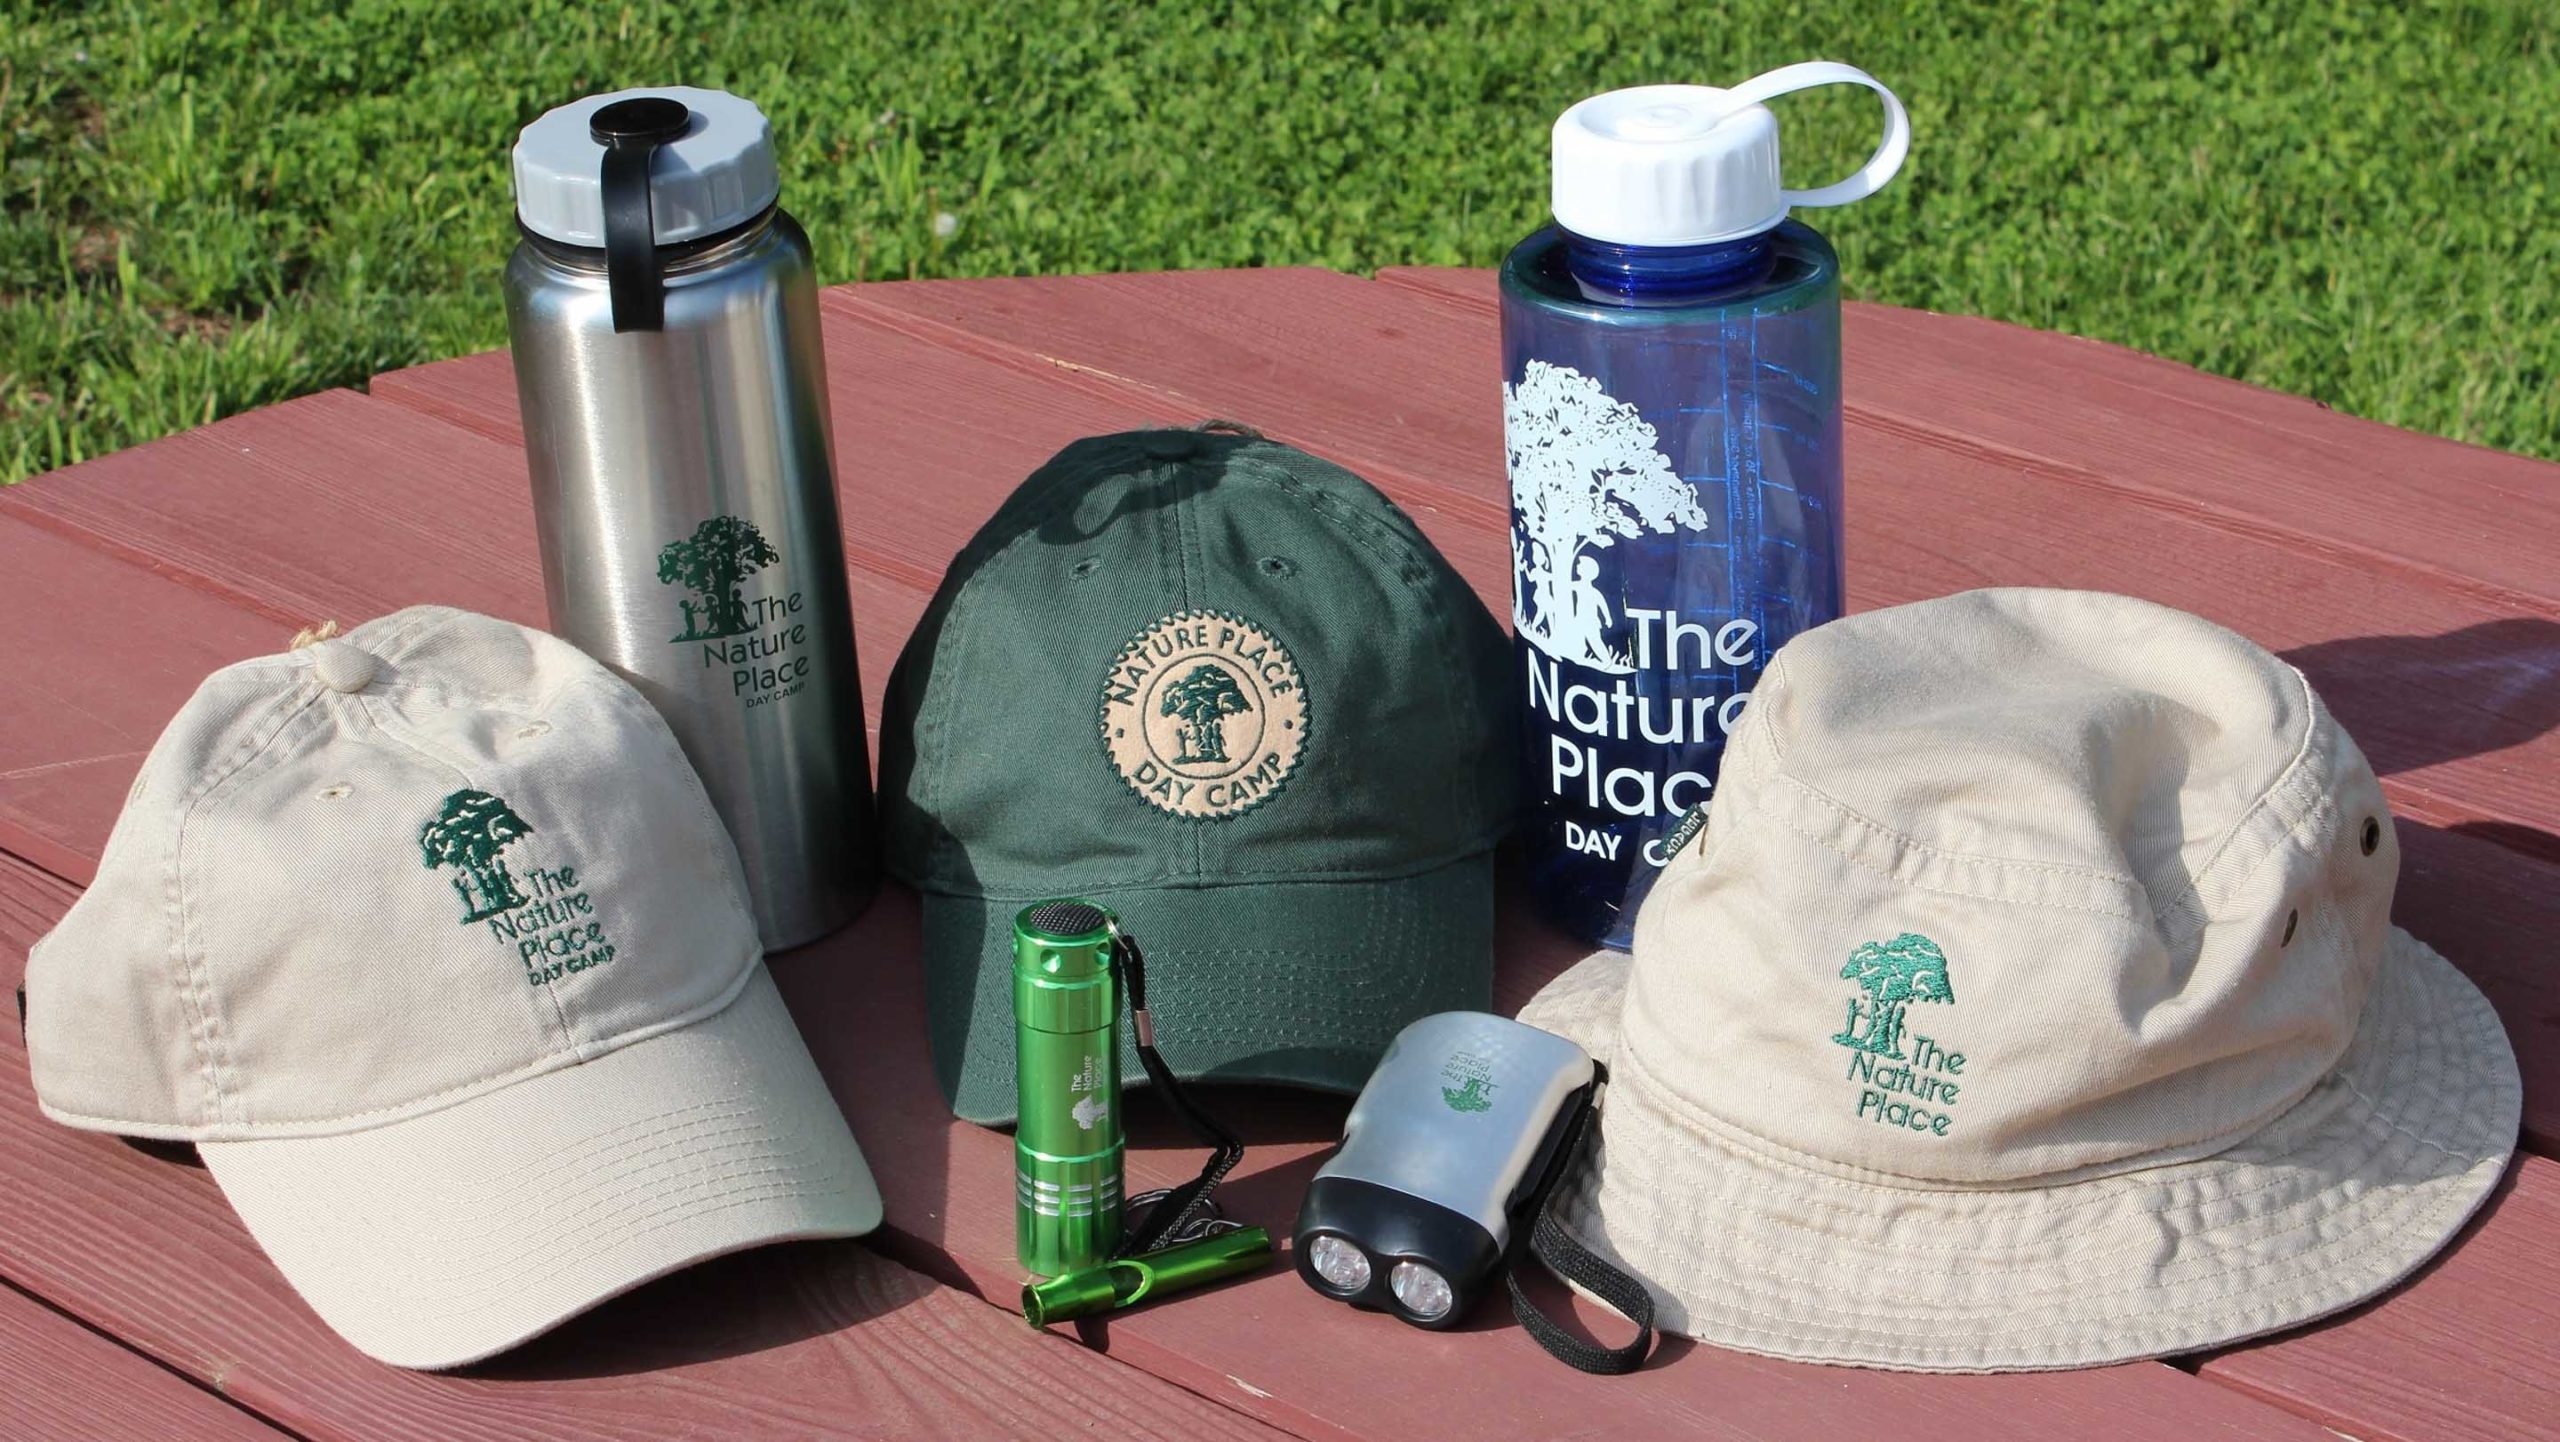 Nature Place Day Camp hats and water bottles